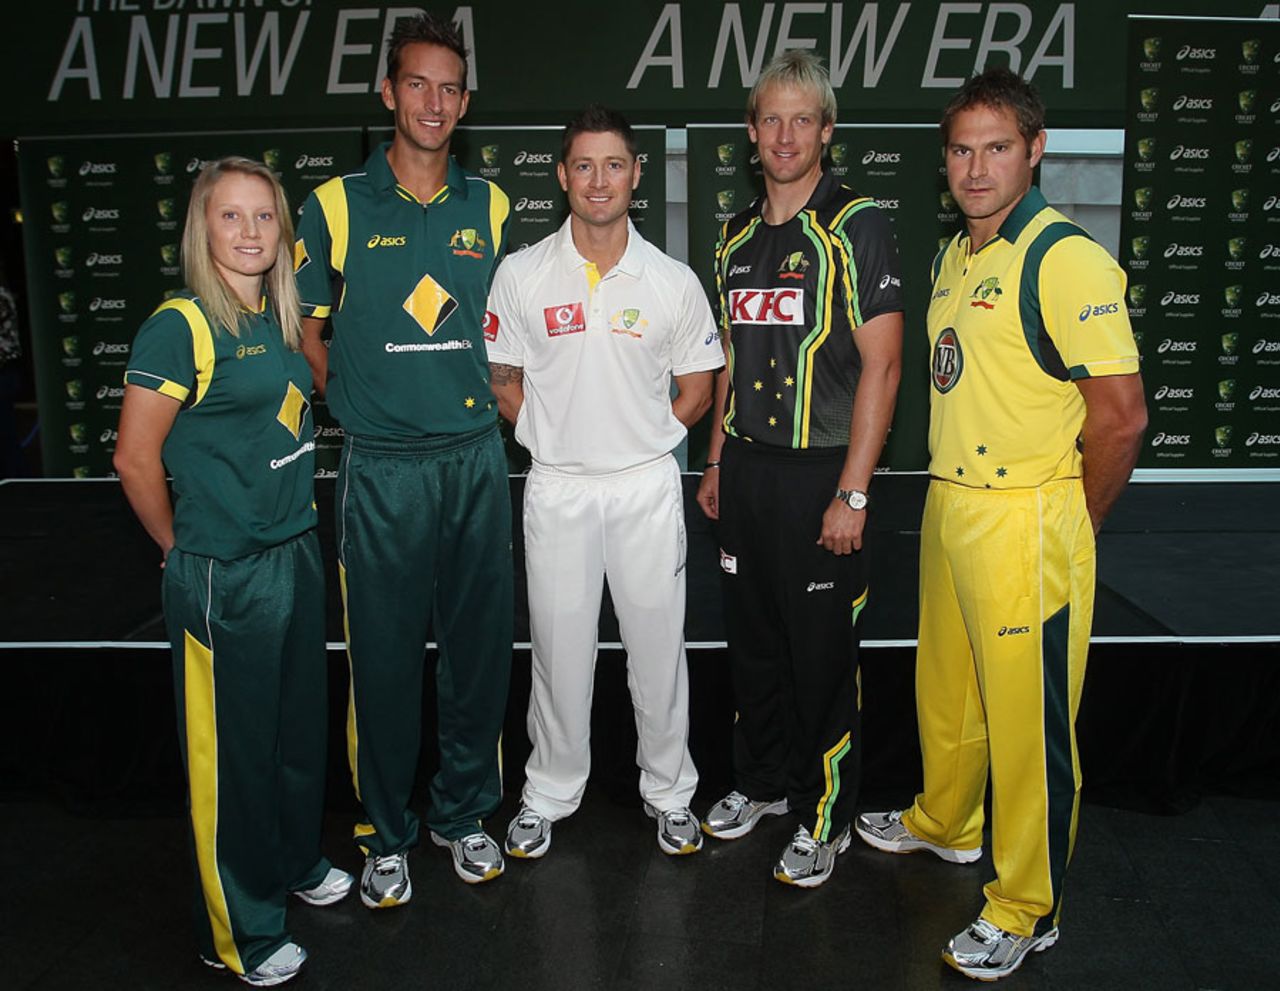 Australia's cricketers at the launch of their new uniform, Sydney, October 4, 2011